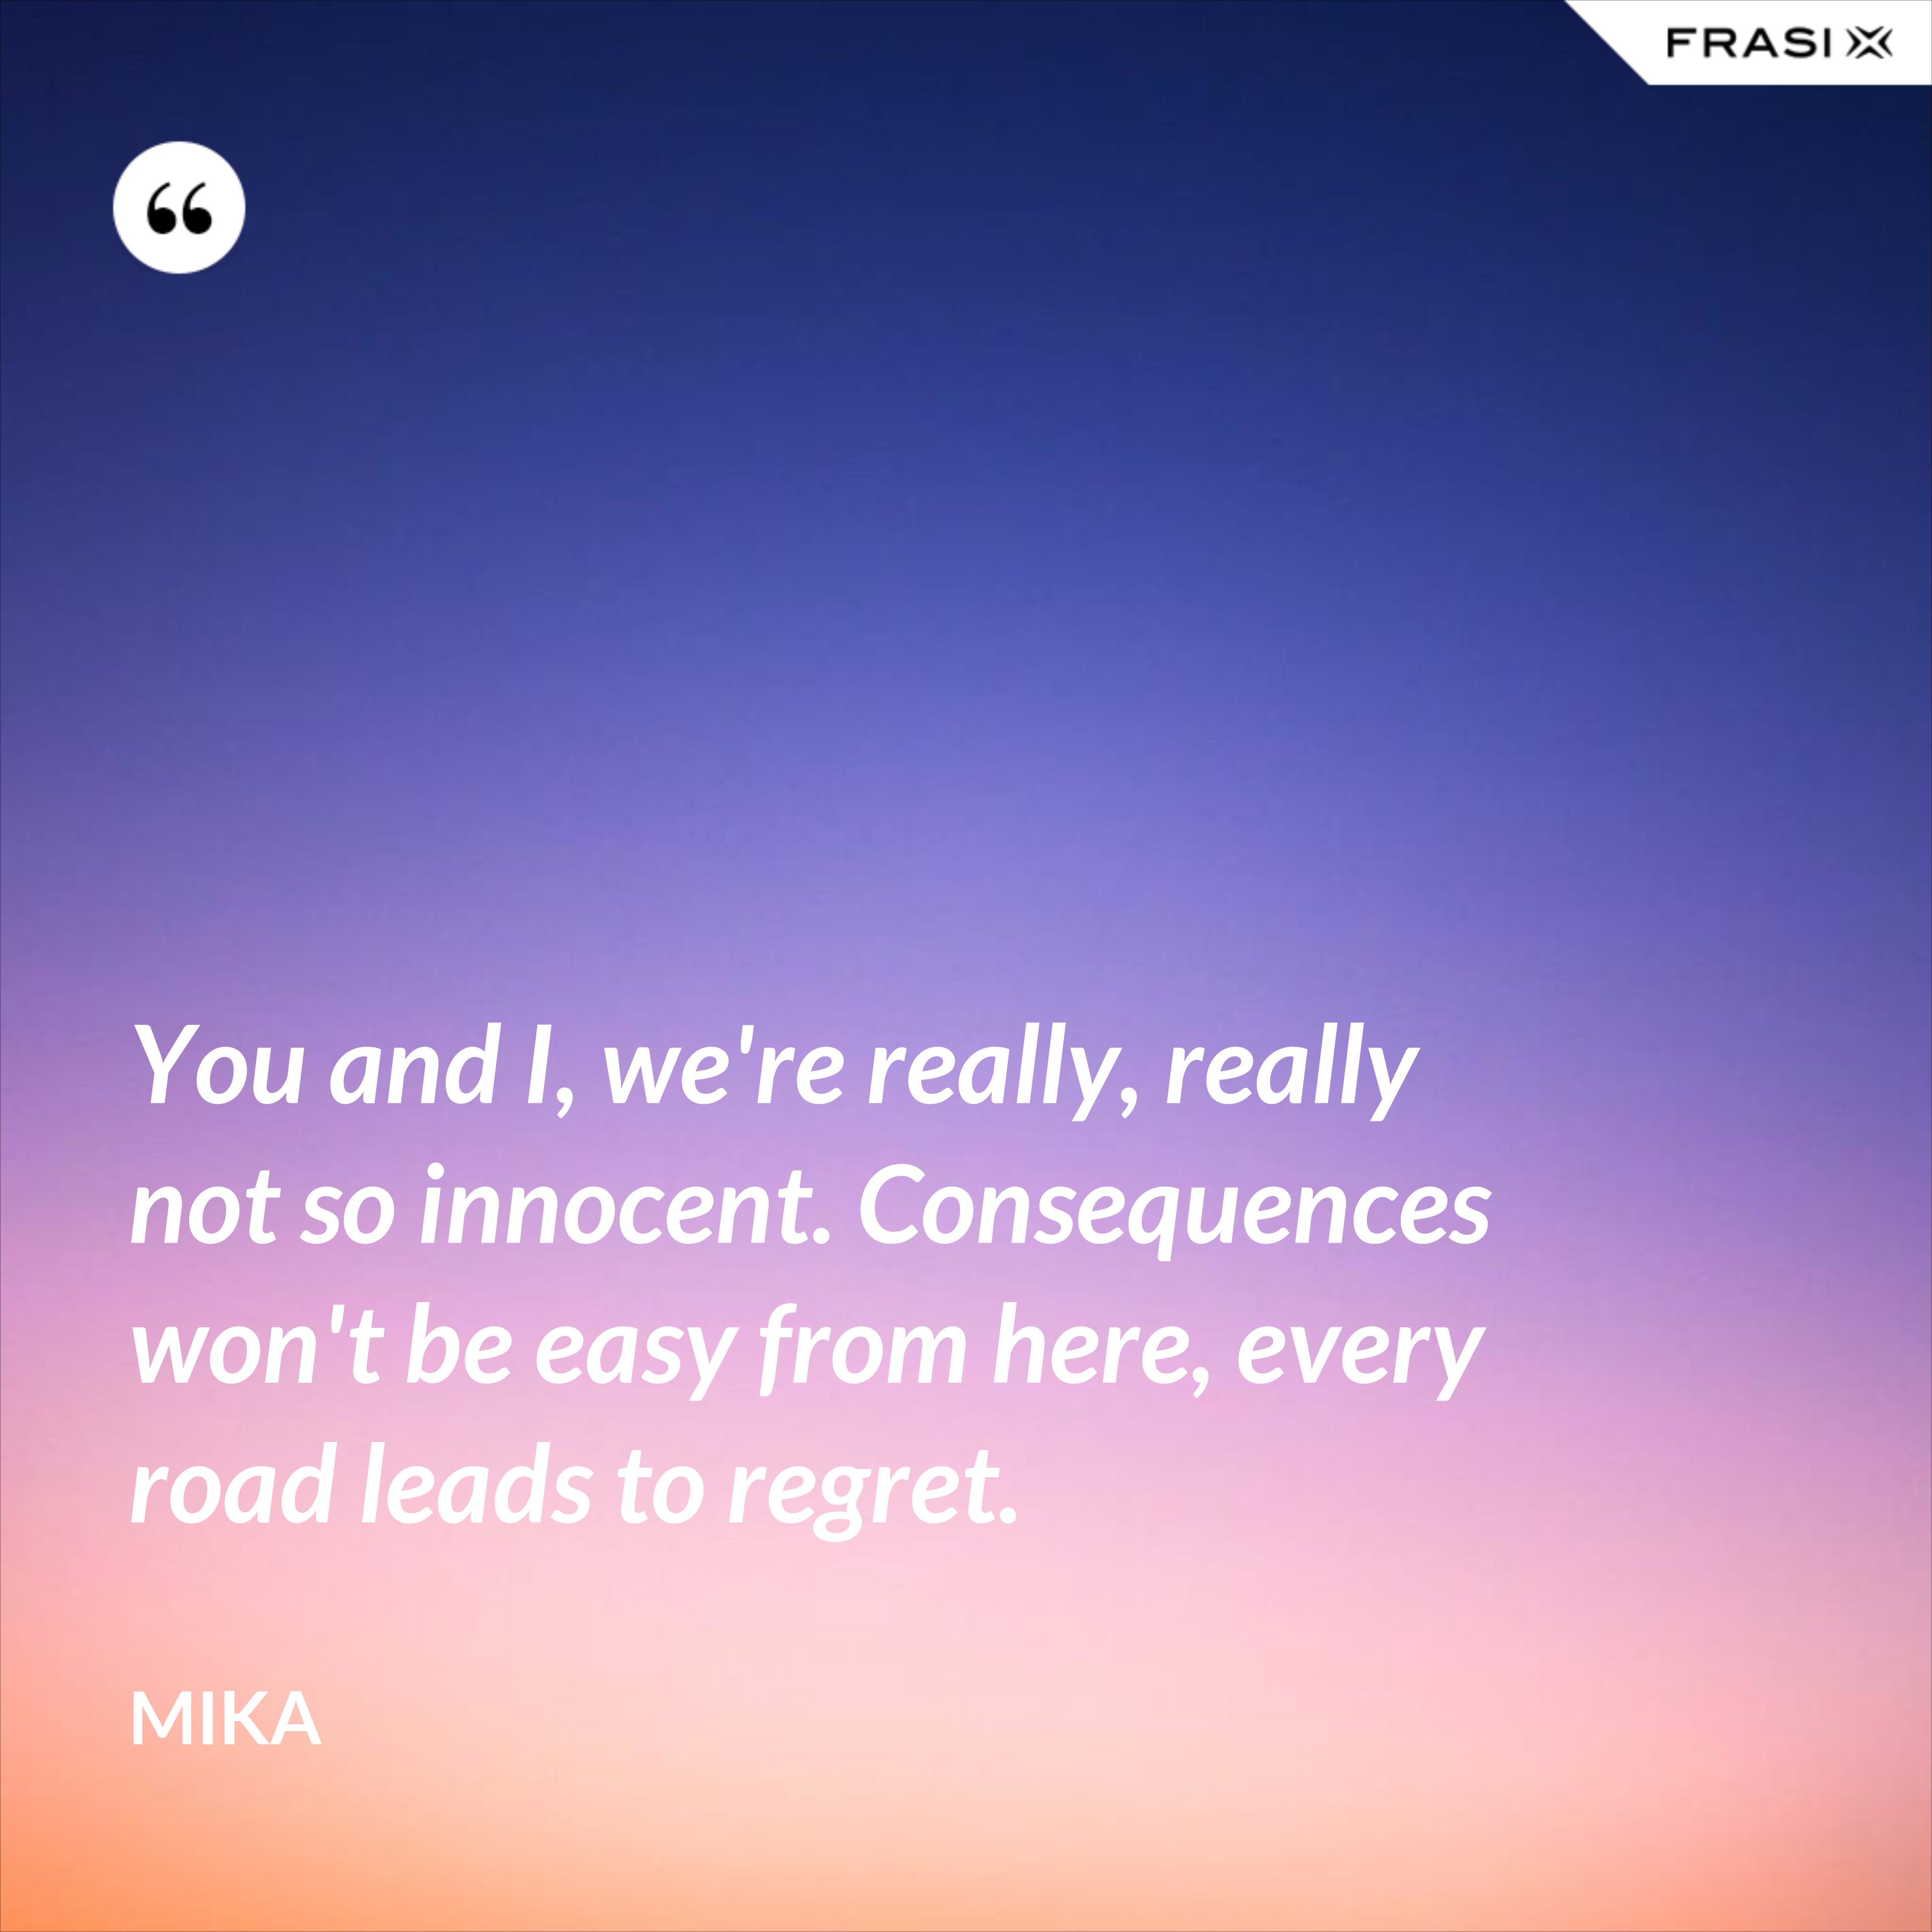 You and I, we're really, really not so innocent. Consequences won't be easy from here, every road leads to regret. - Mika